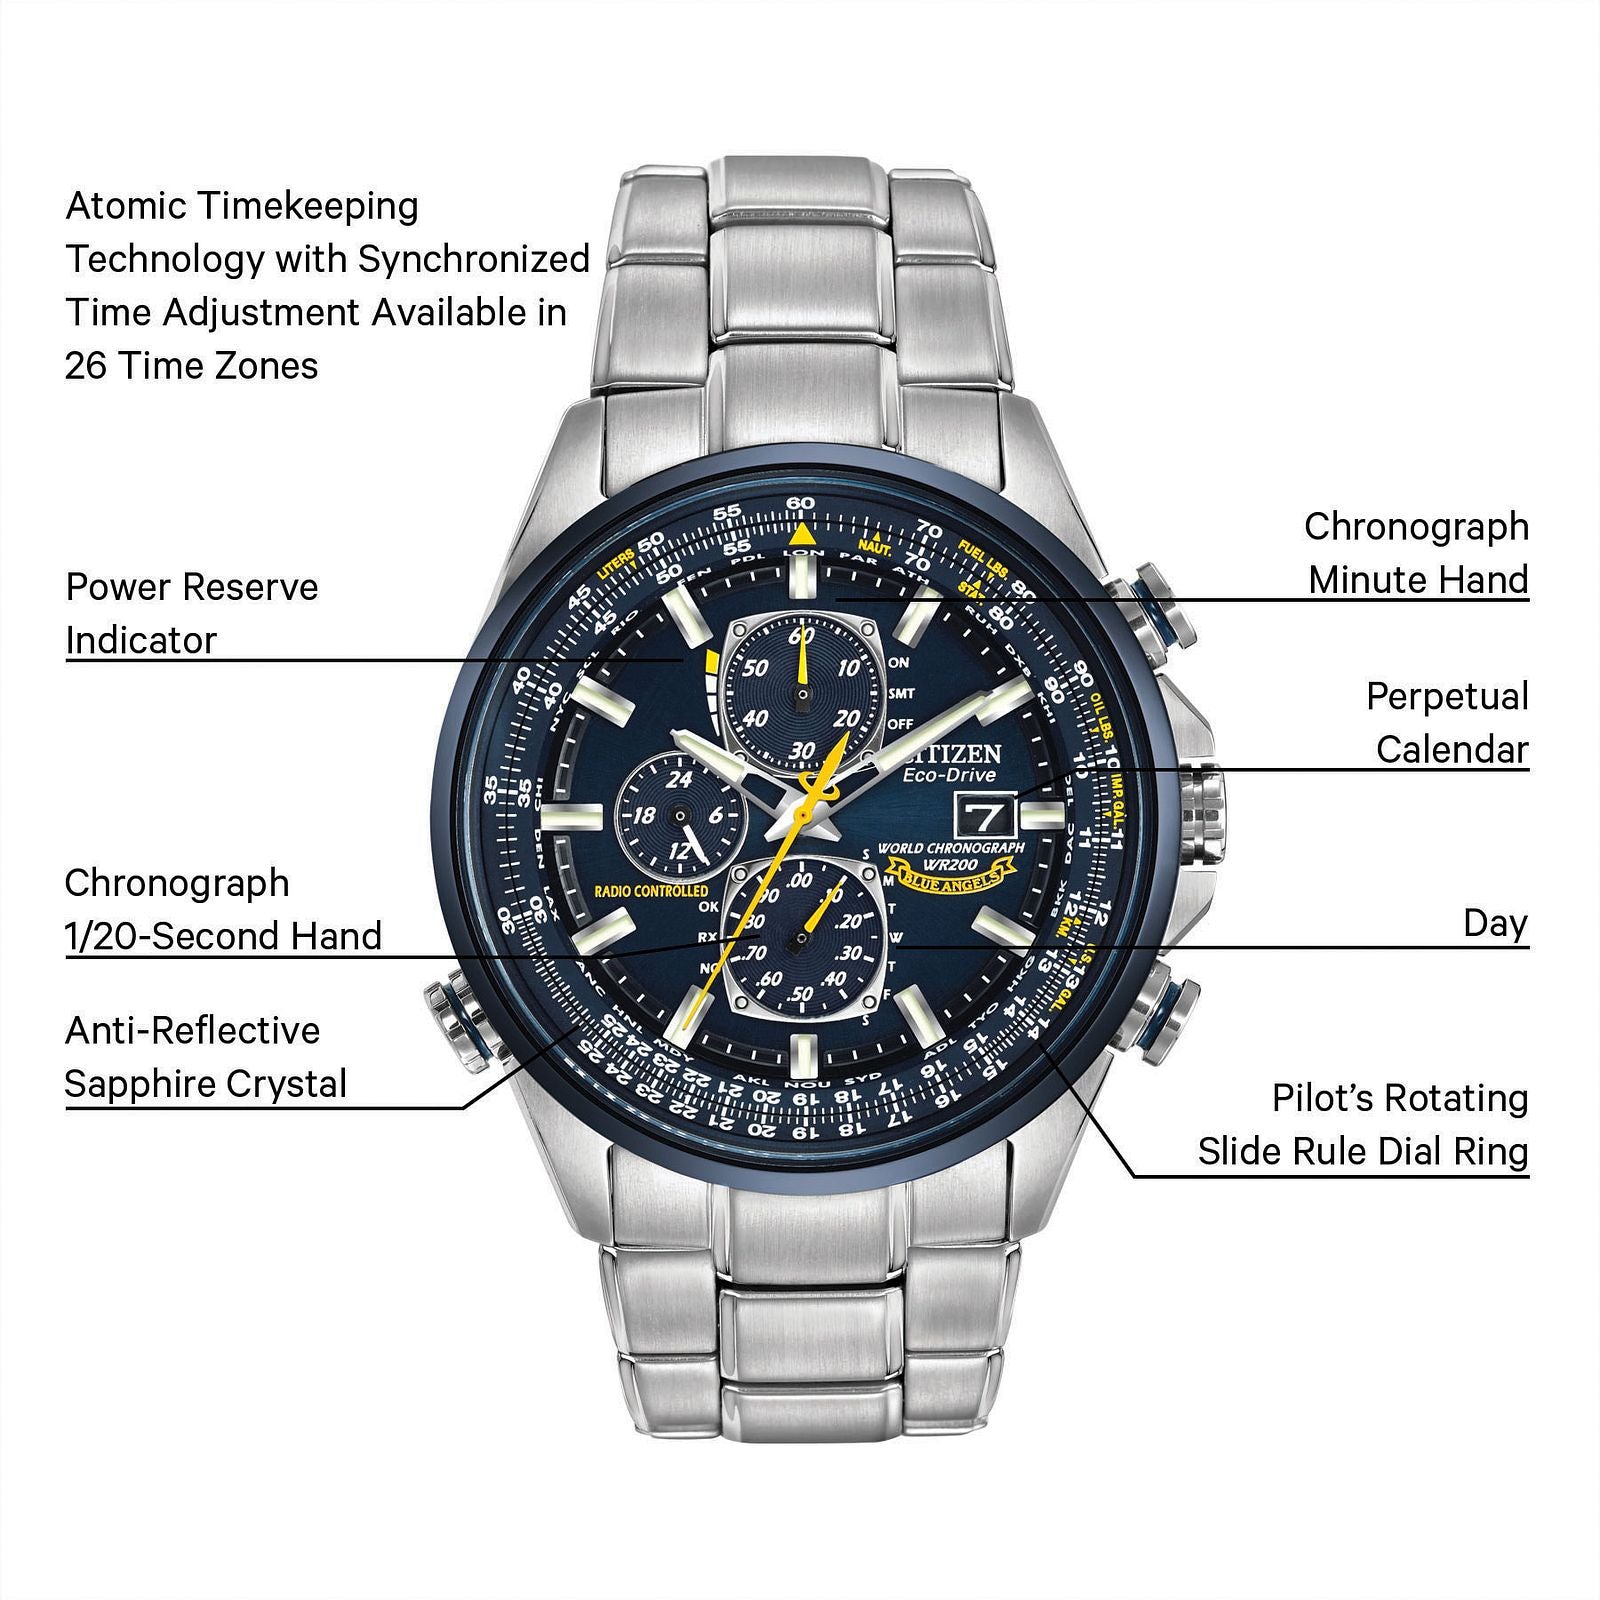 World Chronograph A-T Blue Angels Watch AT8020-54L